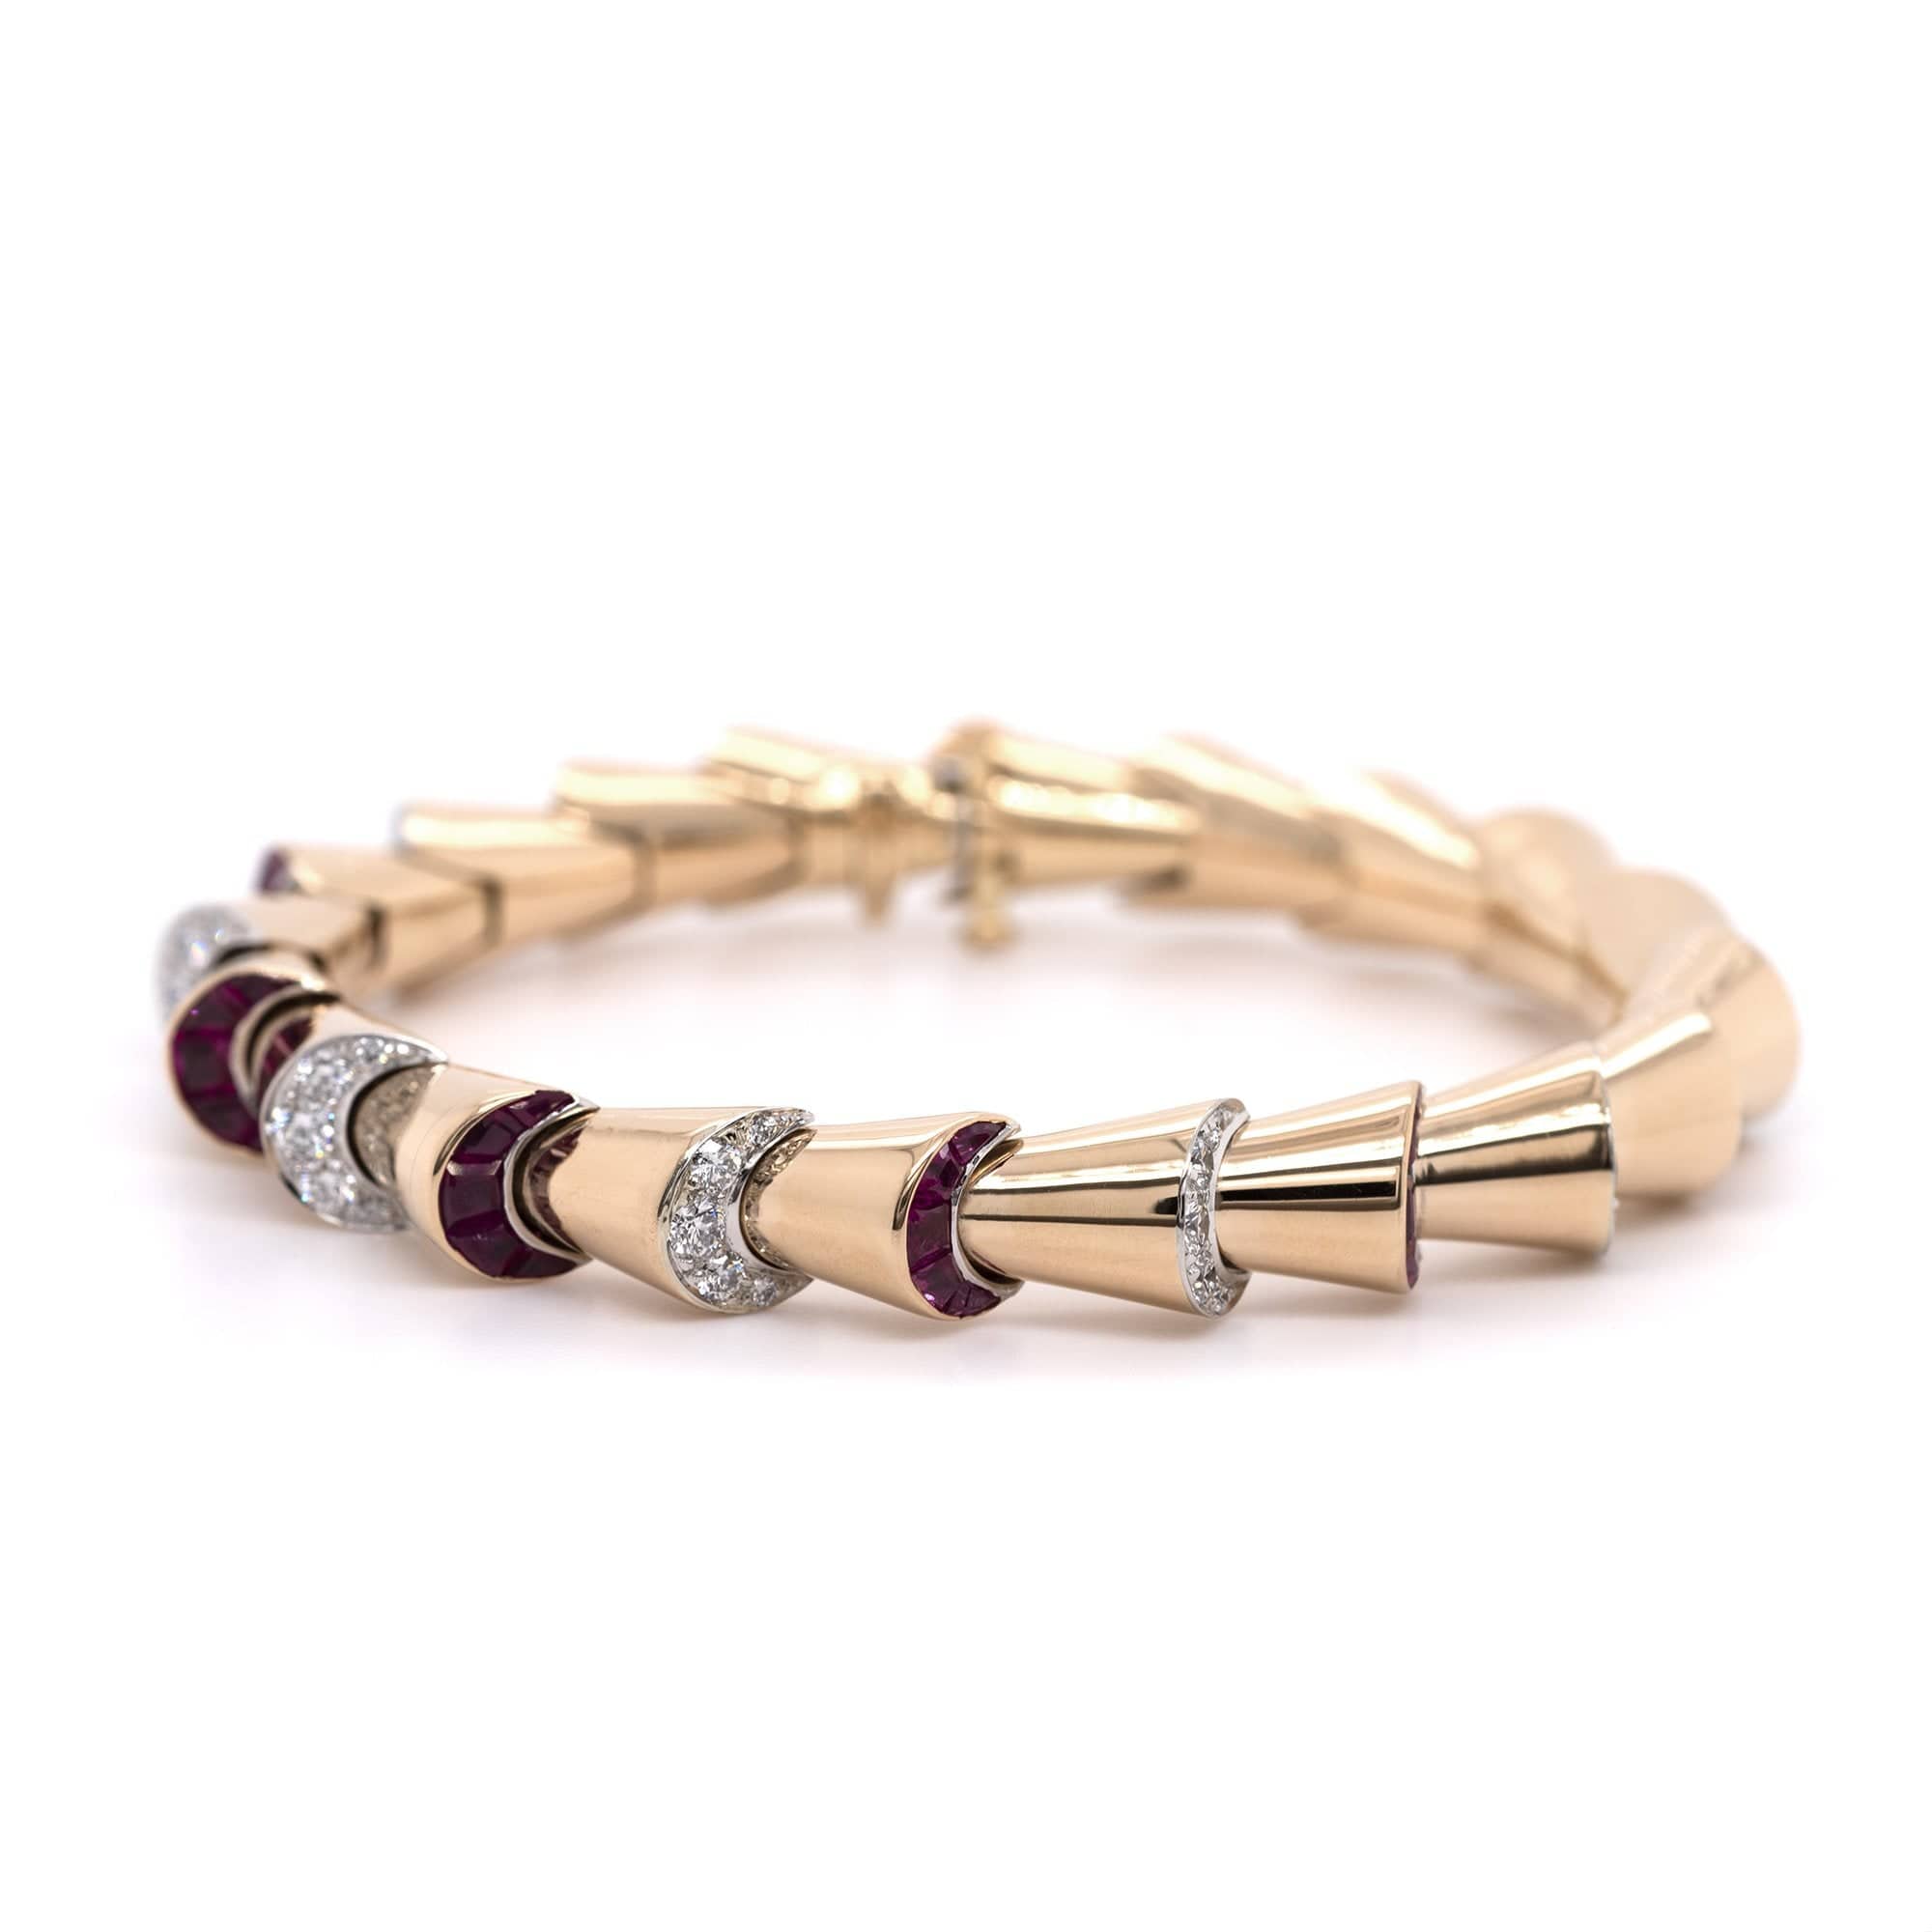 18K Yellow Gold and Platinum Ruby and Diamond Bracelet